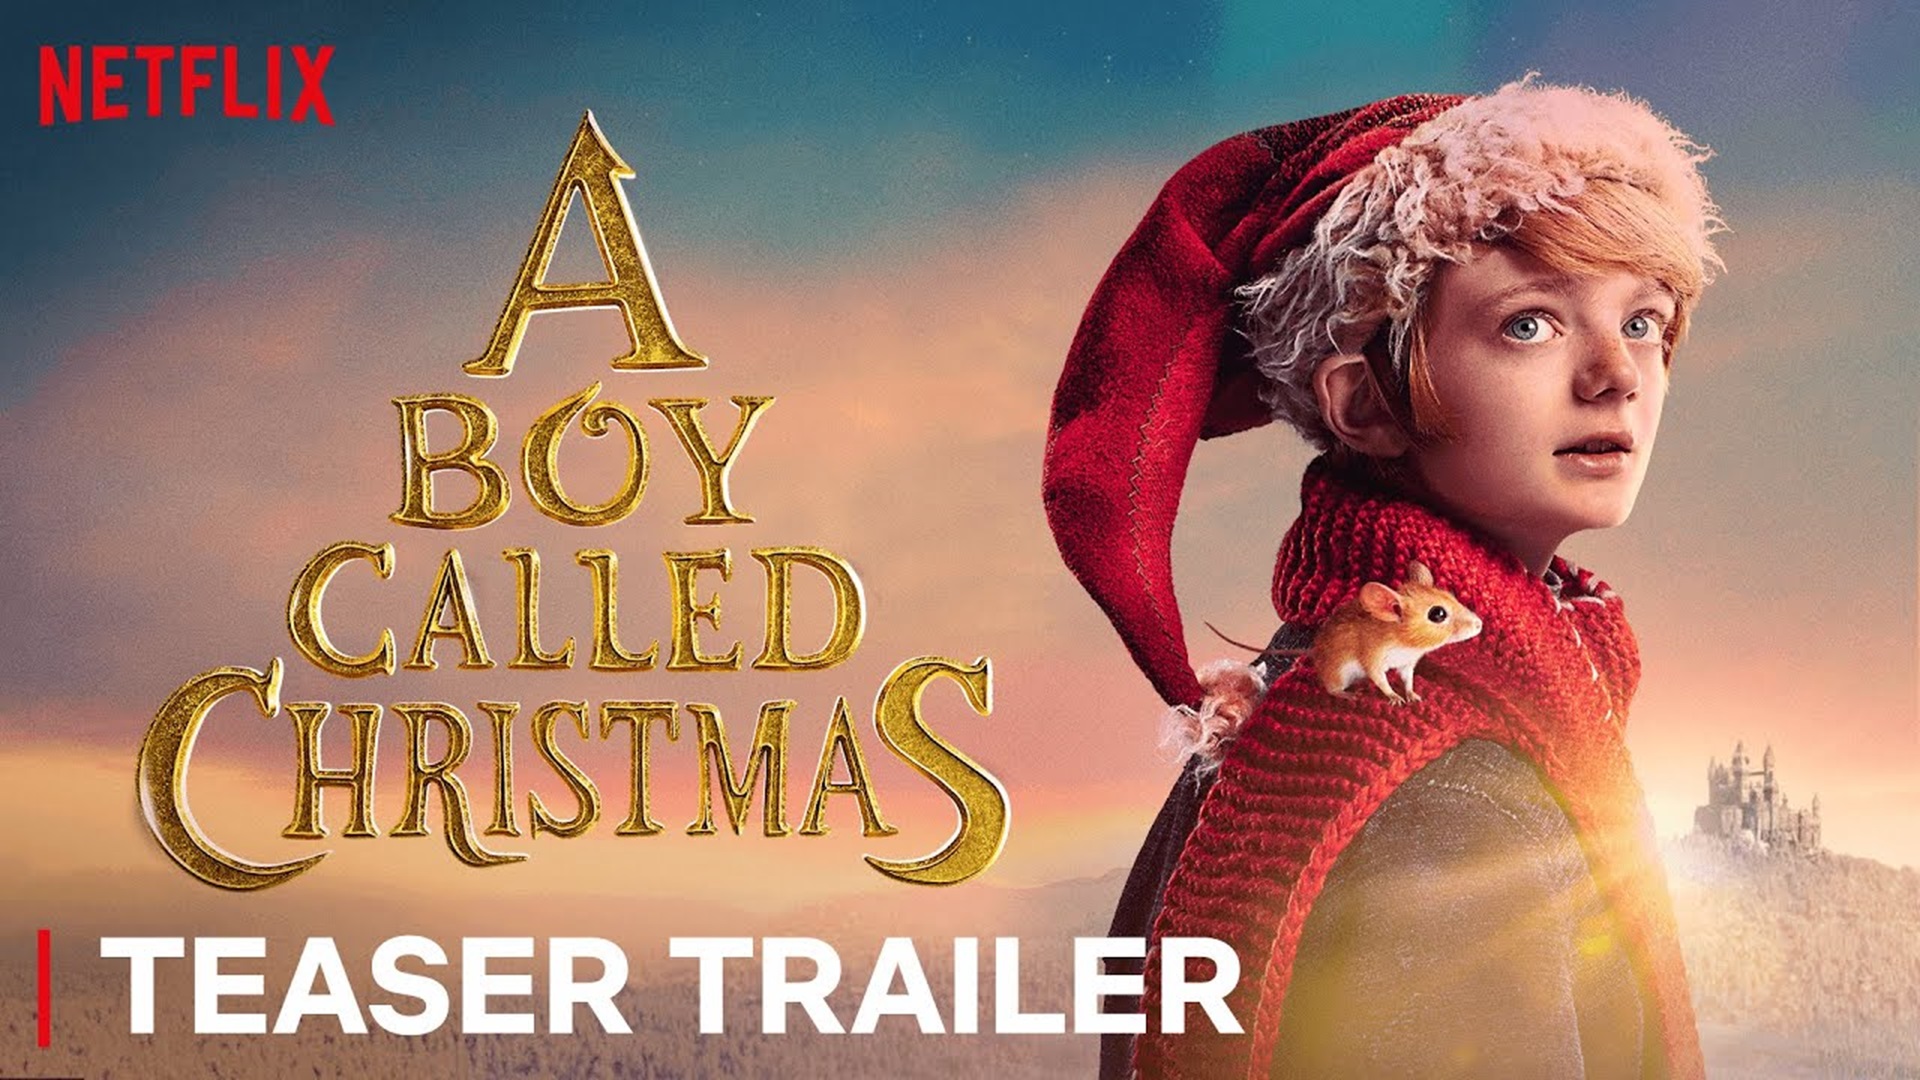 <p>This is a more modern film that has a wonderful story and is filled with Christmas magic and good values. There are a few moments of intense suspense which could make younger kids a bit anxious, but overall a very solid family film!</p>